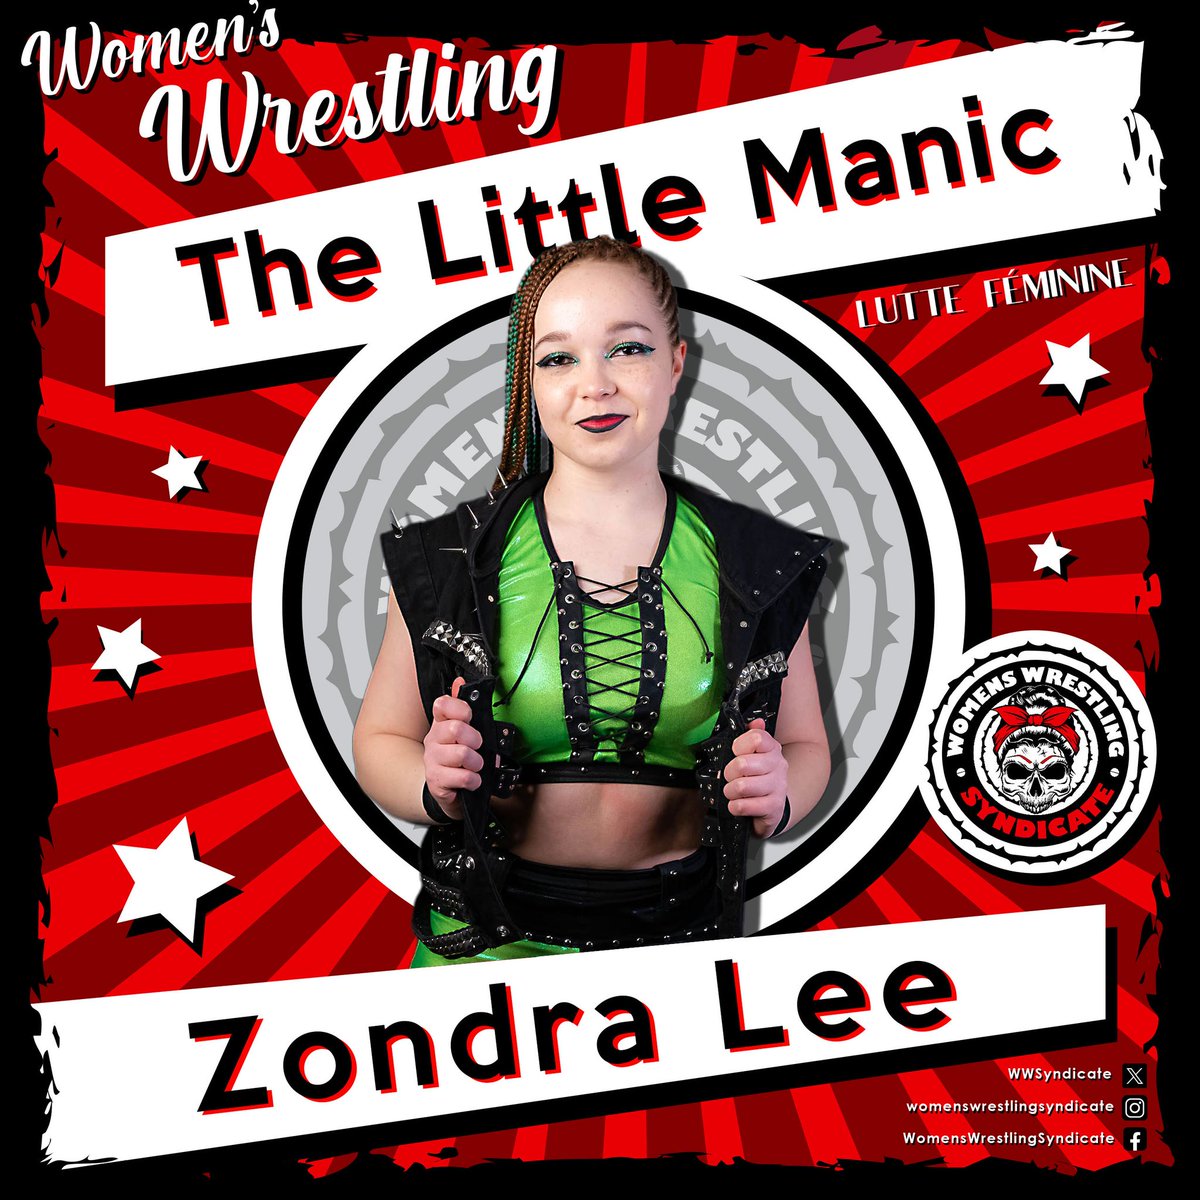 WWS TALENT ANNOUCEMENT 'The Little Manic' Zondra Lee joins @WWSyndicate! Get your tickets now for “AYOYE! Tu m’fais mal” presented by Women’s Wrestling Syndicate on Sunday, May 19, 2024, at 2PM here: thepointofsale.com/tickets/wws-20…